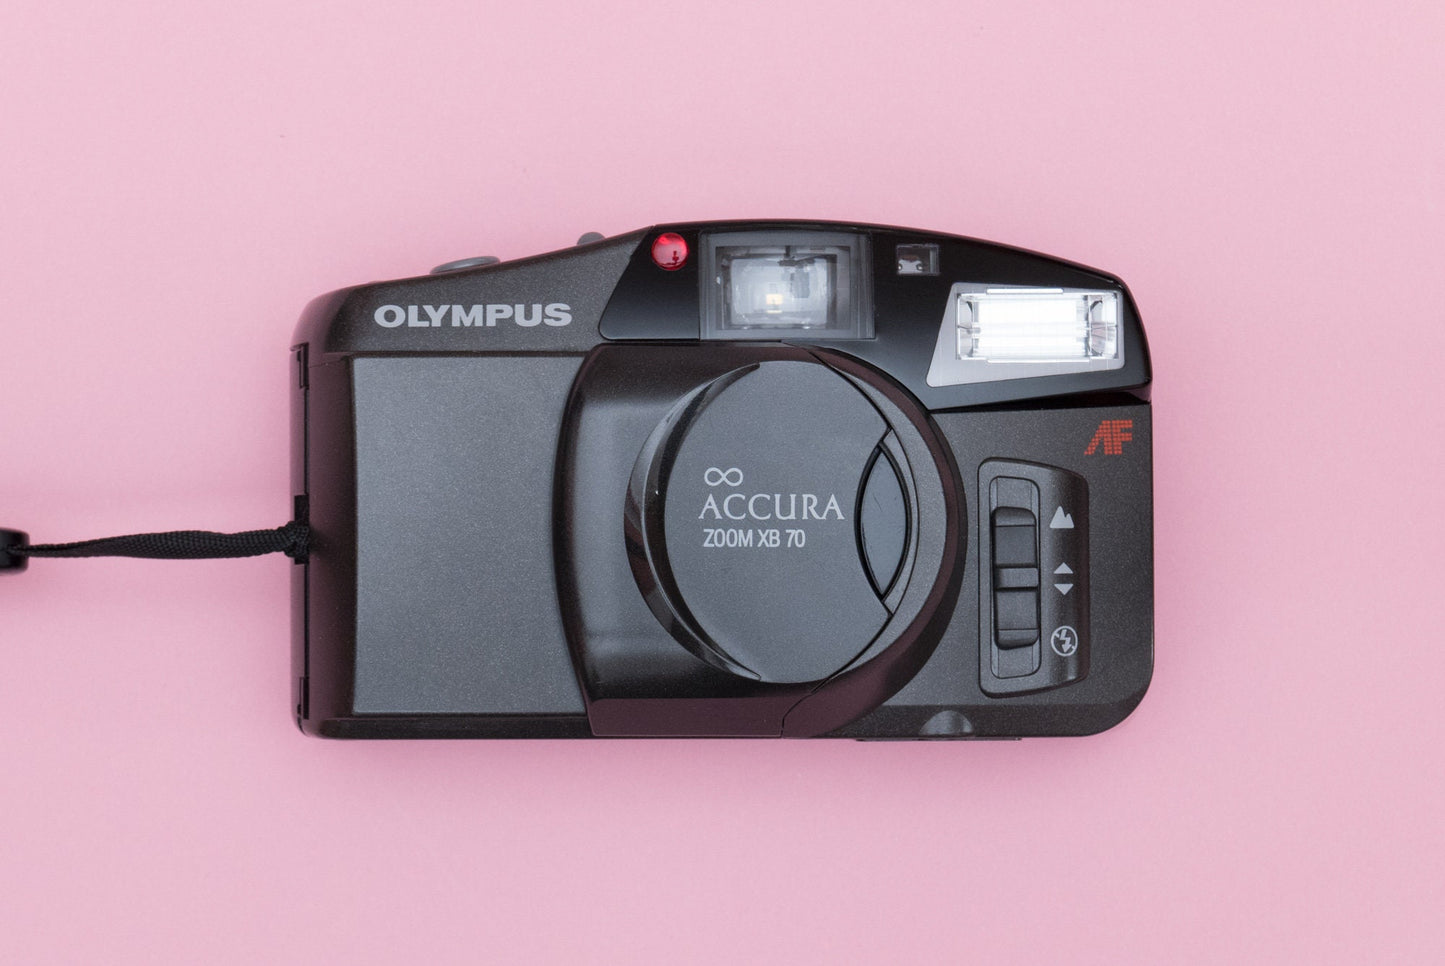 Olympus Infinity Accura Zoom XB 70 35mm Point and Shoot Compact Film Camera